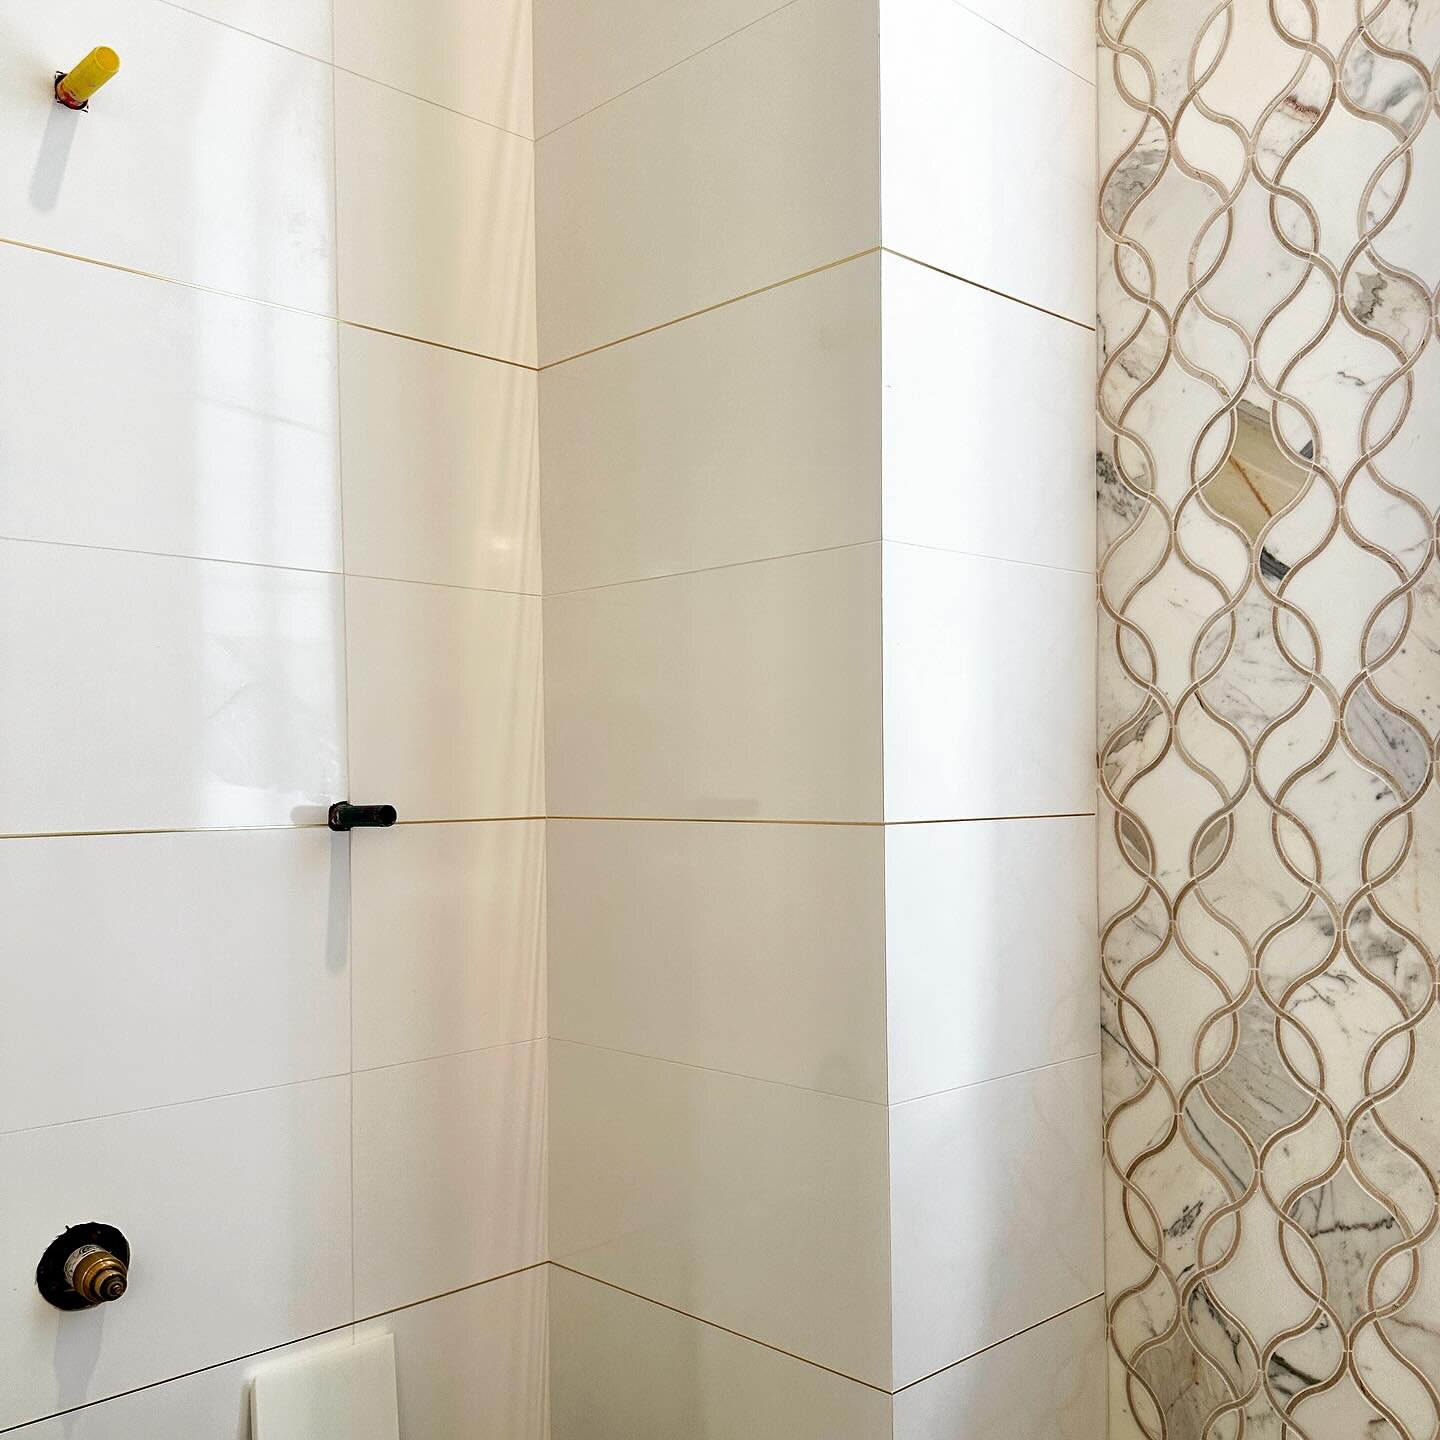 It&rsquo;s the small details that make all the difference. Brushed brass metal between every other horizontal run of tile gives the shower just that extra luxe feel. #itsallinthedetails #interiordesign #southfloridadesign #bathroomdesign